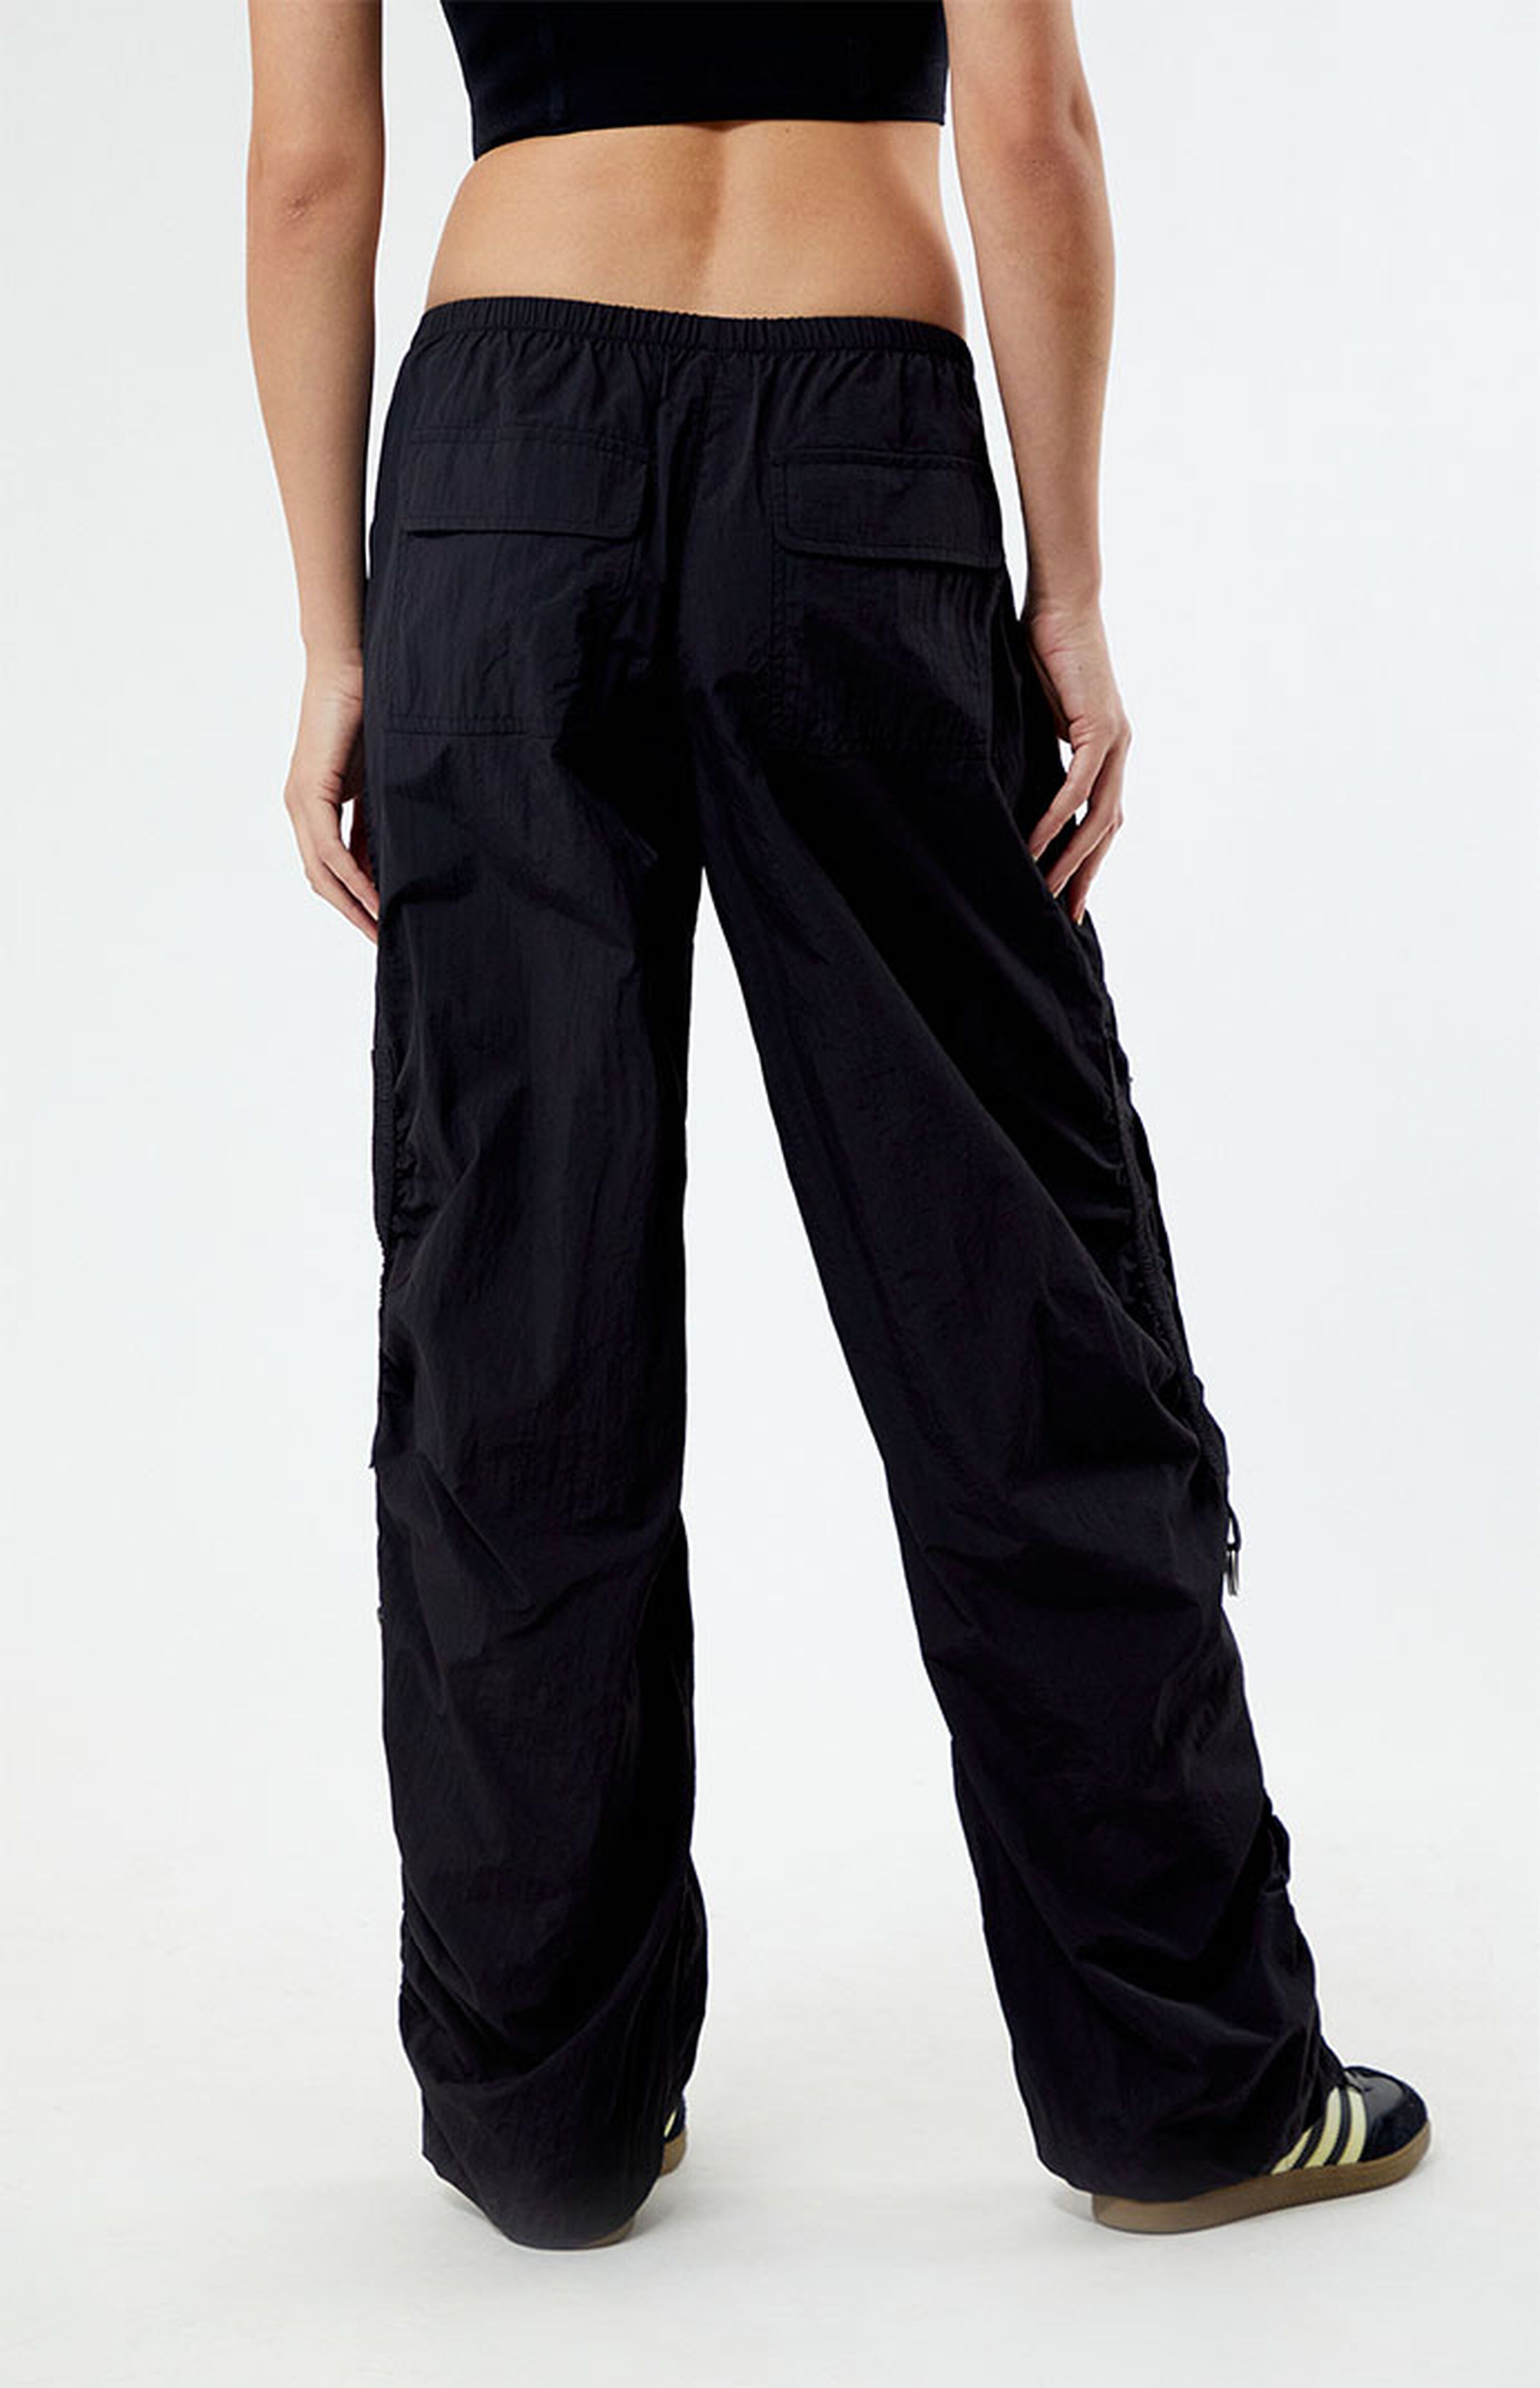 PacSun Ruched Low Rise Pull-On Pants | PacSun